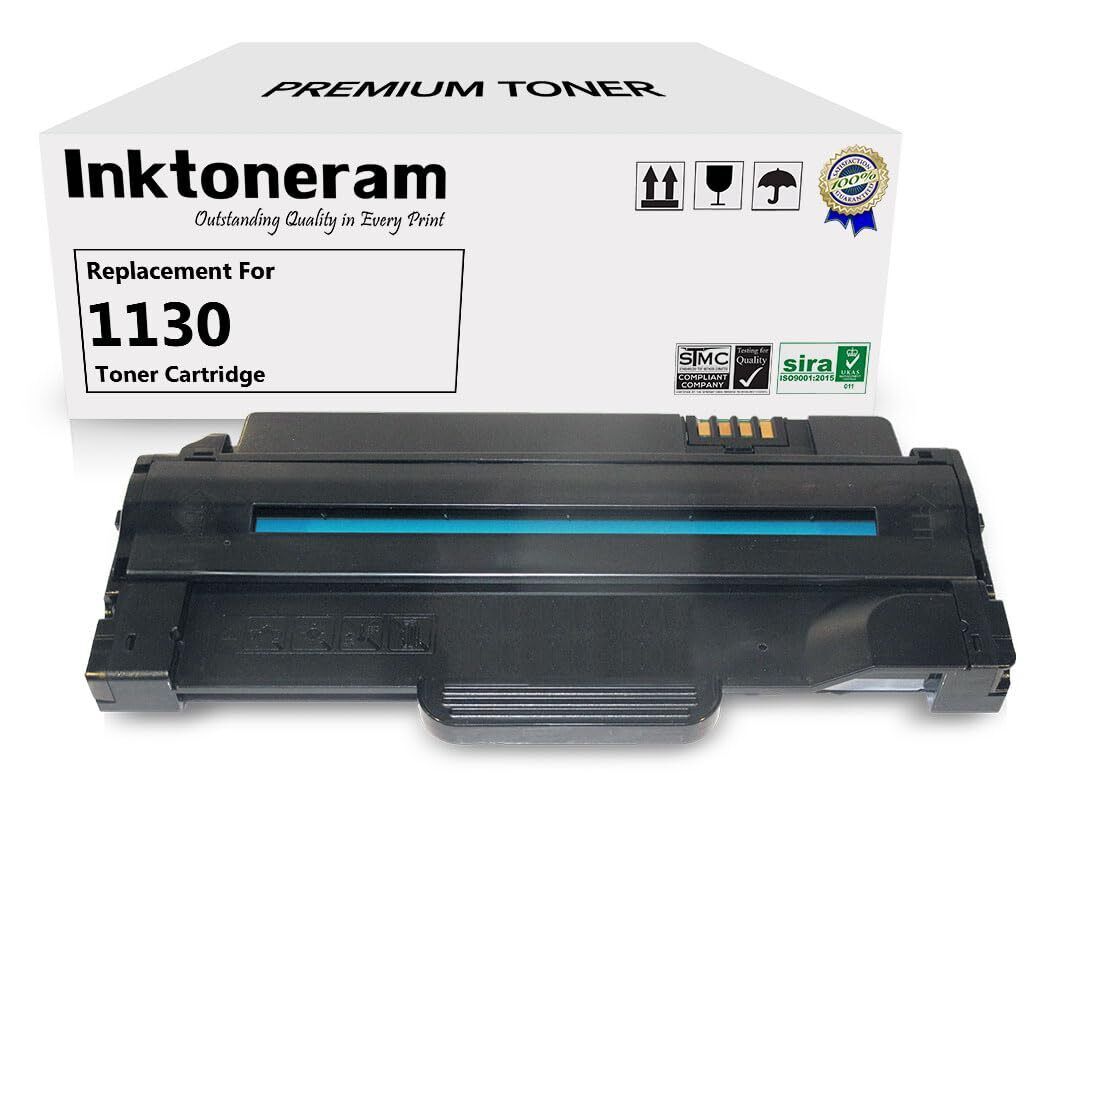 Compatible Toner Cartridge Replacement for Dell 1130 1130n 1133 1135n High Yi...